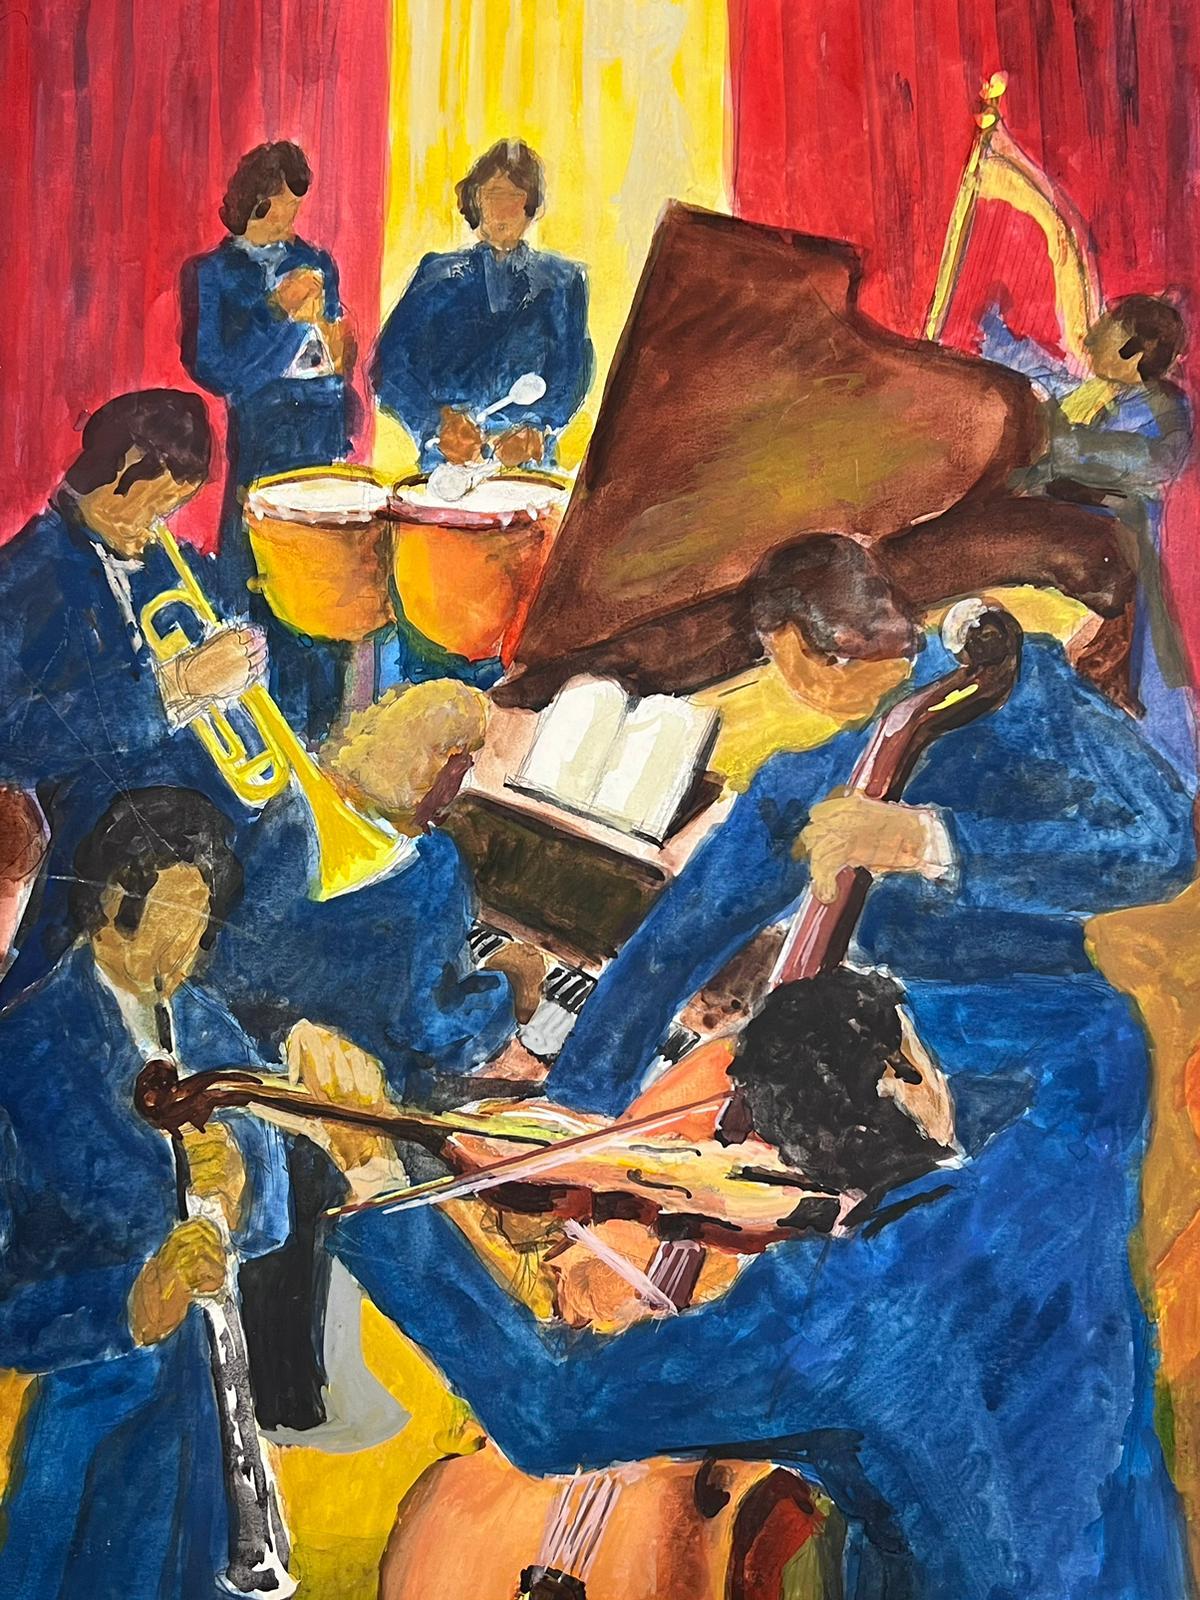 The Band
by Guy Nicod
(French 1923 - 2021)
watercolour on artist paper, unframed
painting : 18.5 x 13 inches
provenance: artists estate, France
condition: very good and sound condition